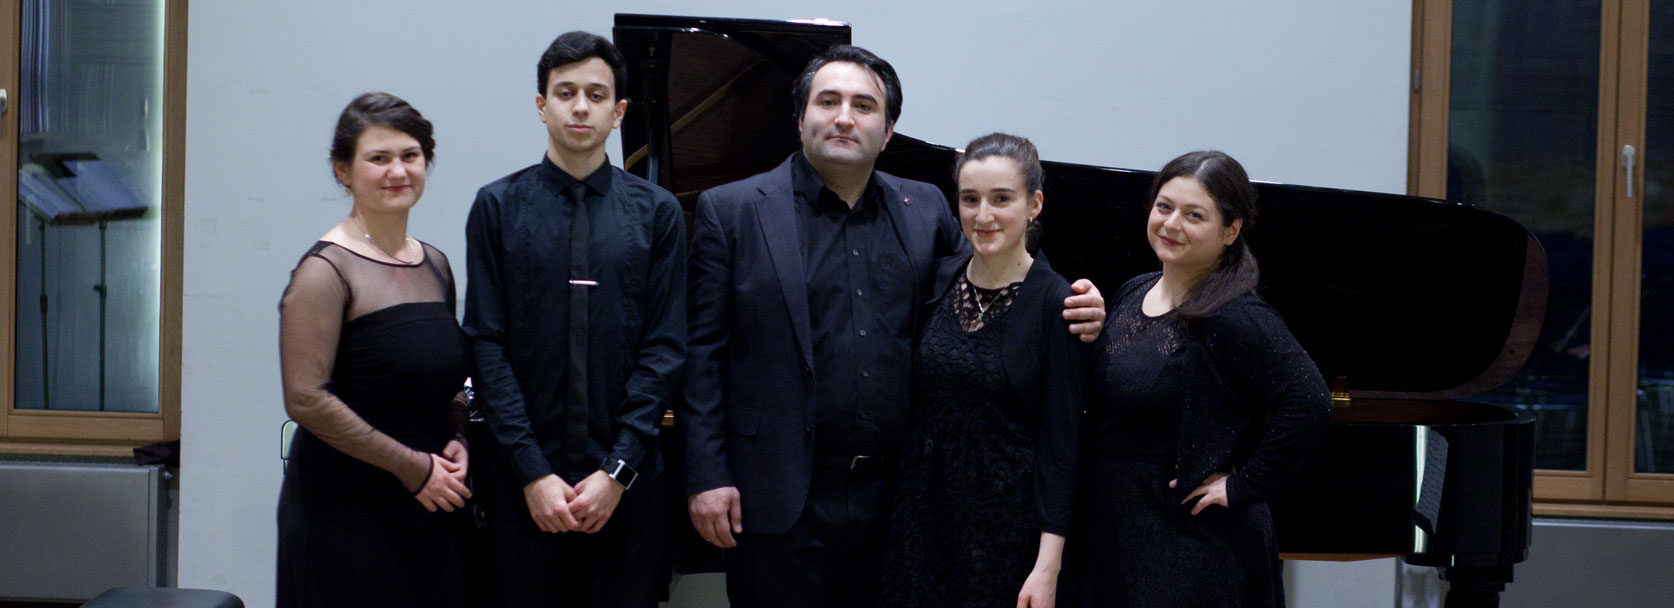 AGBU-HAIK celebrates 10 Years of Partnership with Concert in Rostock